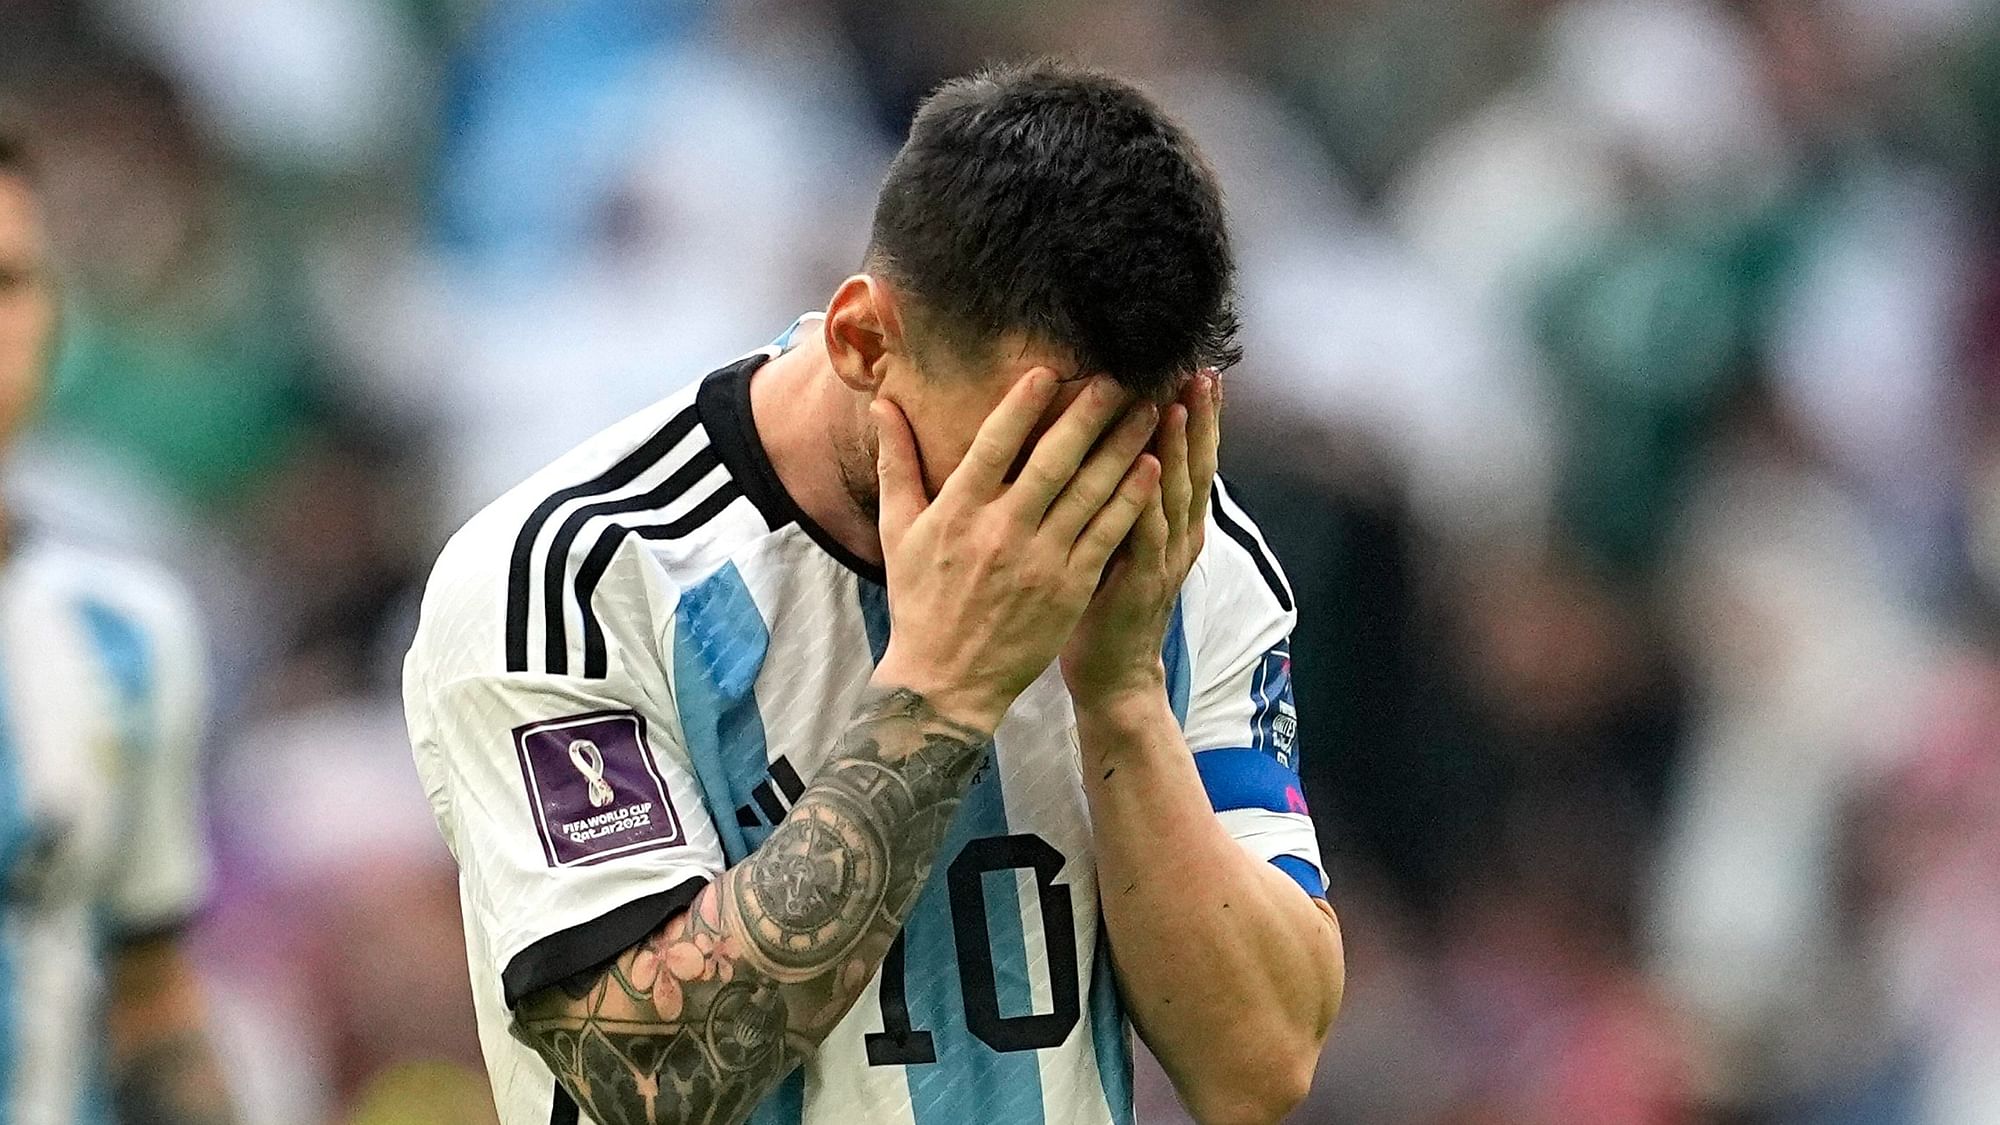 <div class="paragraphs"><p>Lusail: Argentina's Lionel Messi reacts after missing a chance during the World Cup group C soccer match between Argentina and Saudi Arabia.</p></div>